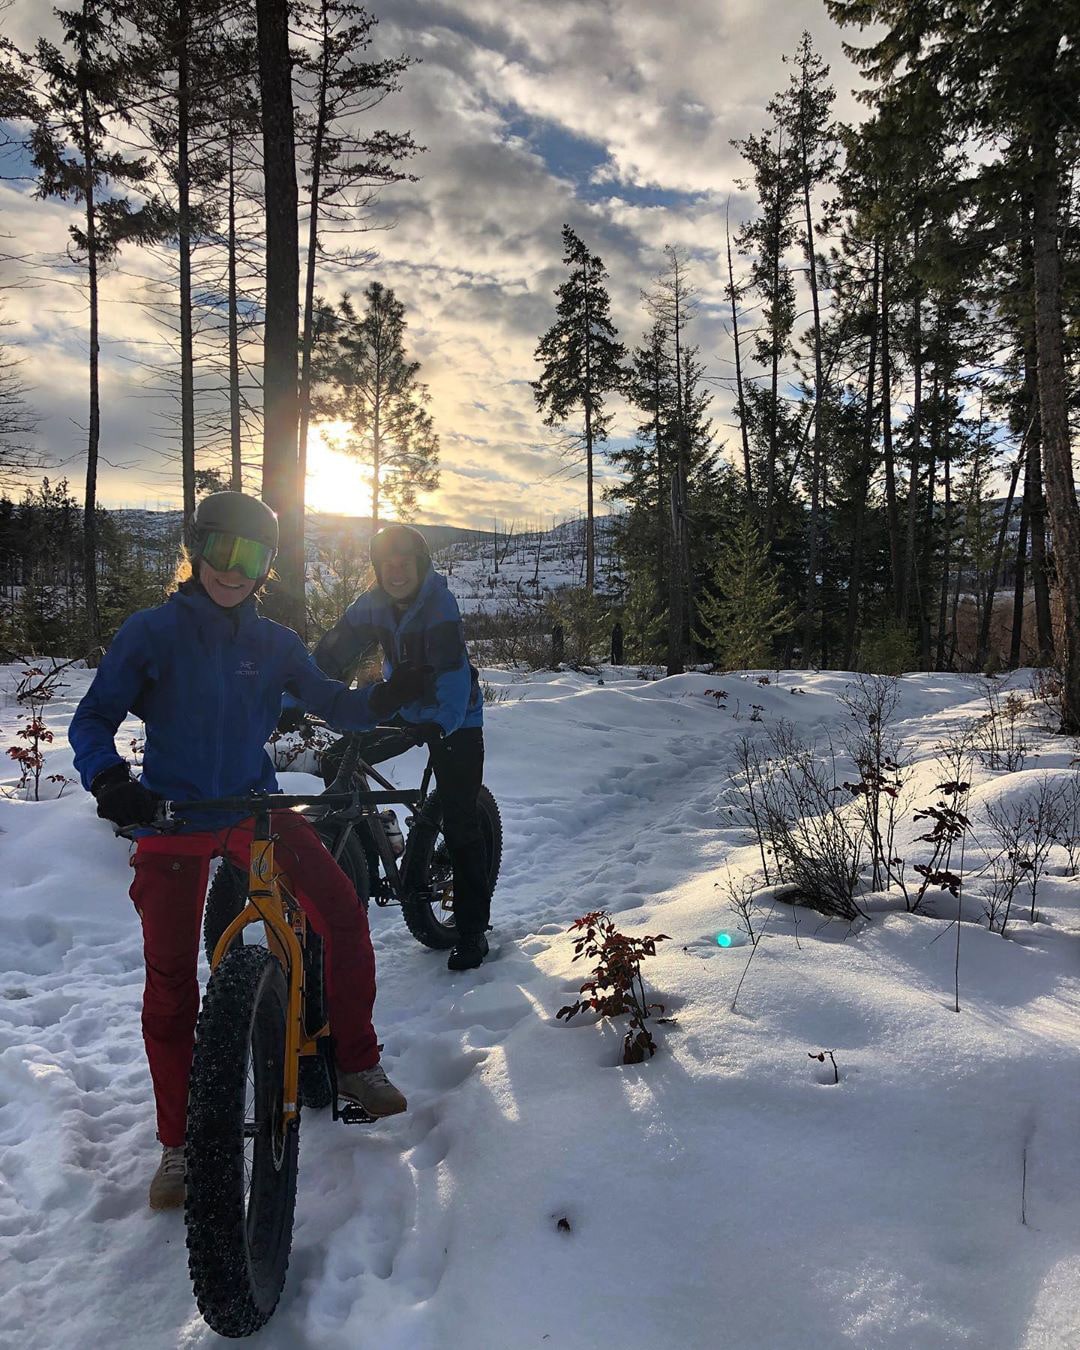  Fatbiking is a good way to explore the Canadian outdoors - the larger tyres help with traction on the slippery ground, and the exercise keeps you warm. 